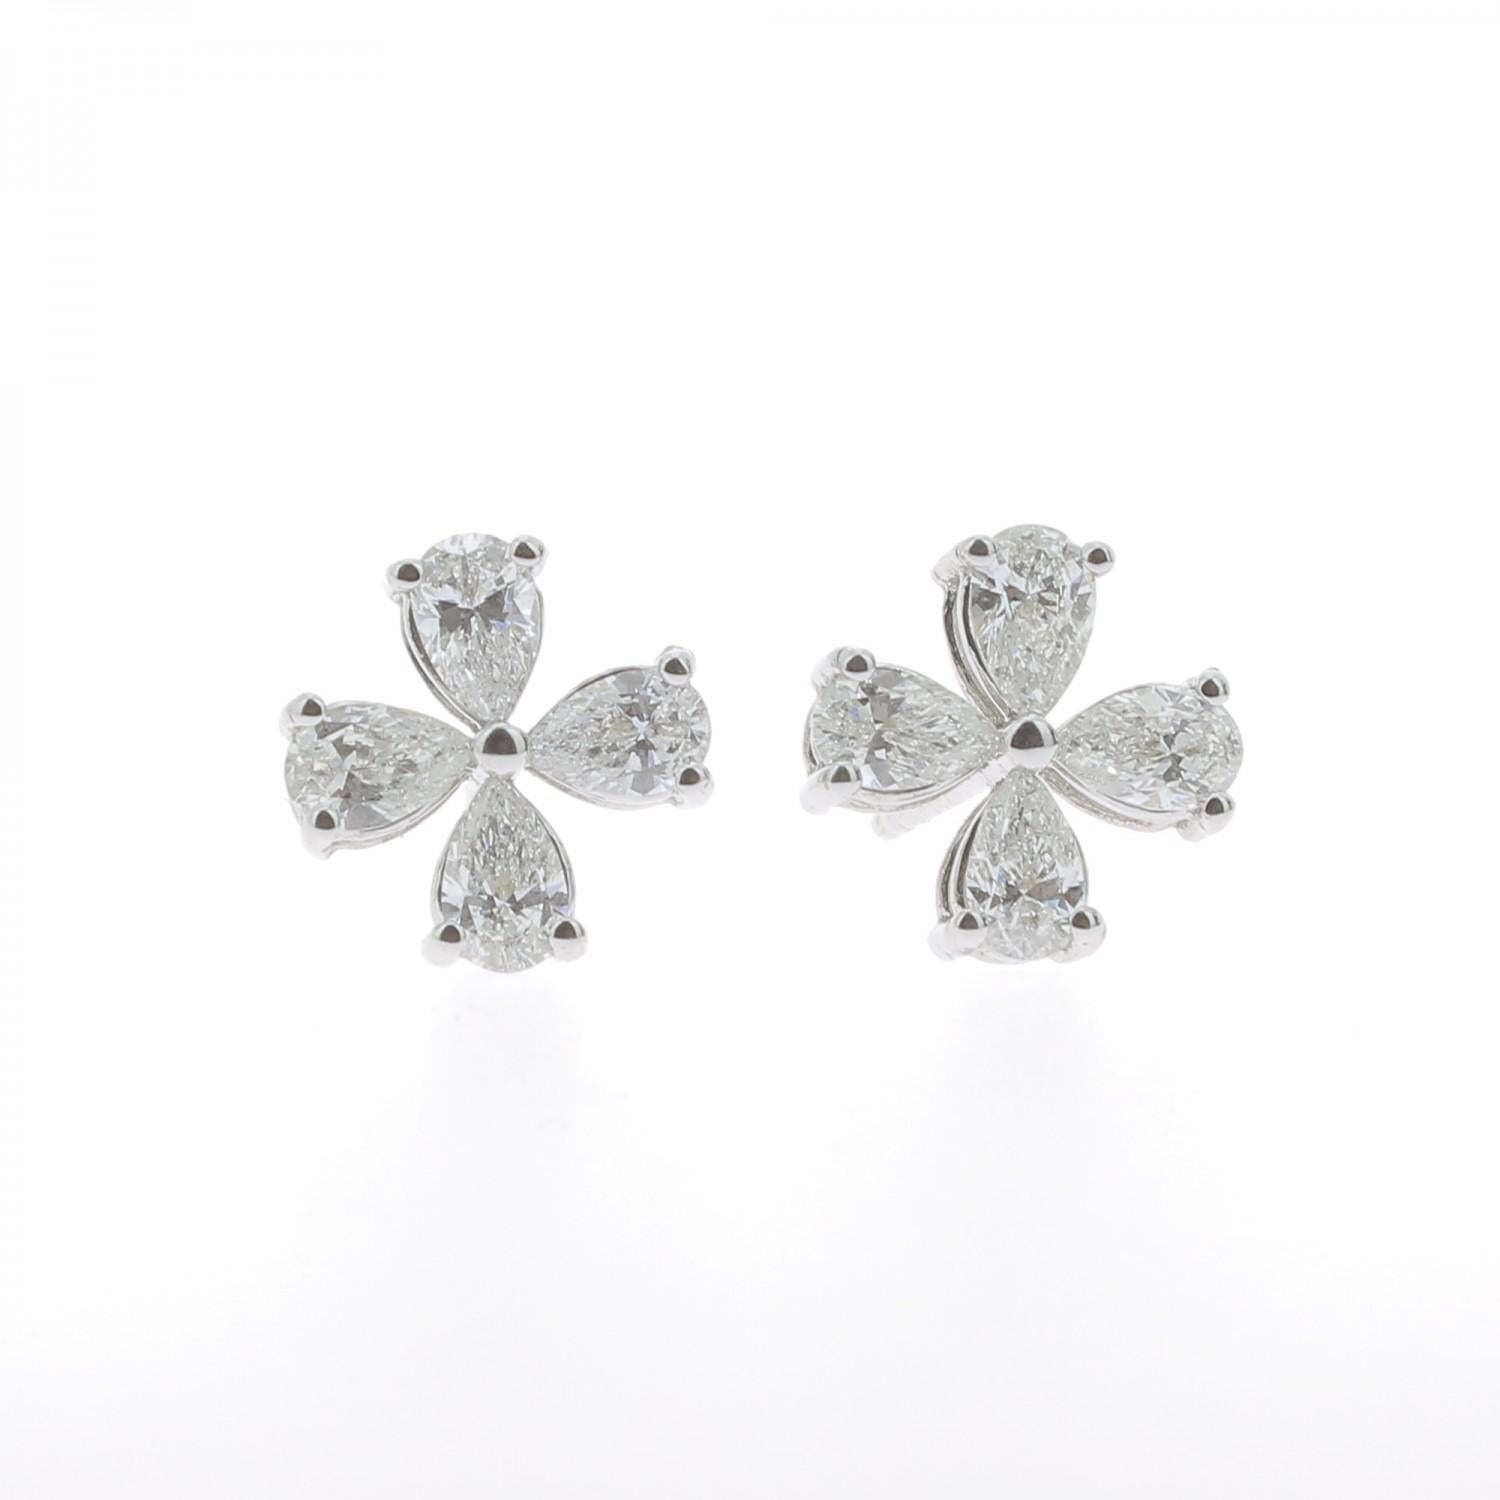 The Clover Diamonds Earrings are set with 8 Pear Diamonds weighing 1.20 Carat, with a clover pattern.
The Pear Diamond Earrings are set 18K White Gold and weight 2.66 Grams.
The Diamond Stud Earrings will come in a beautiful box ready for